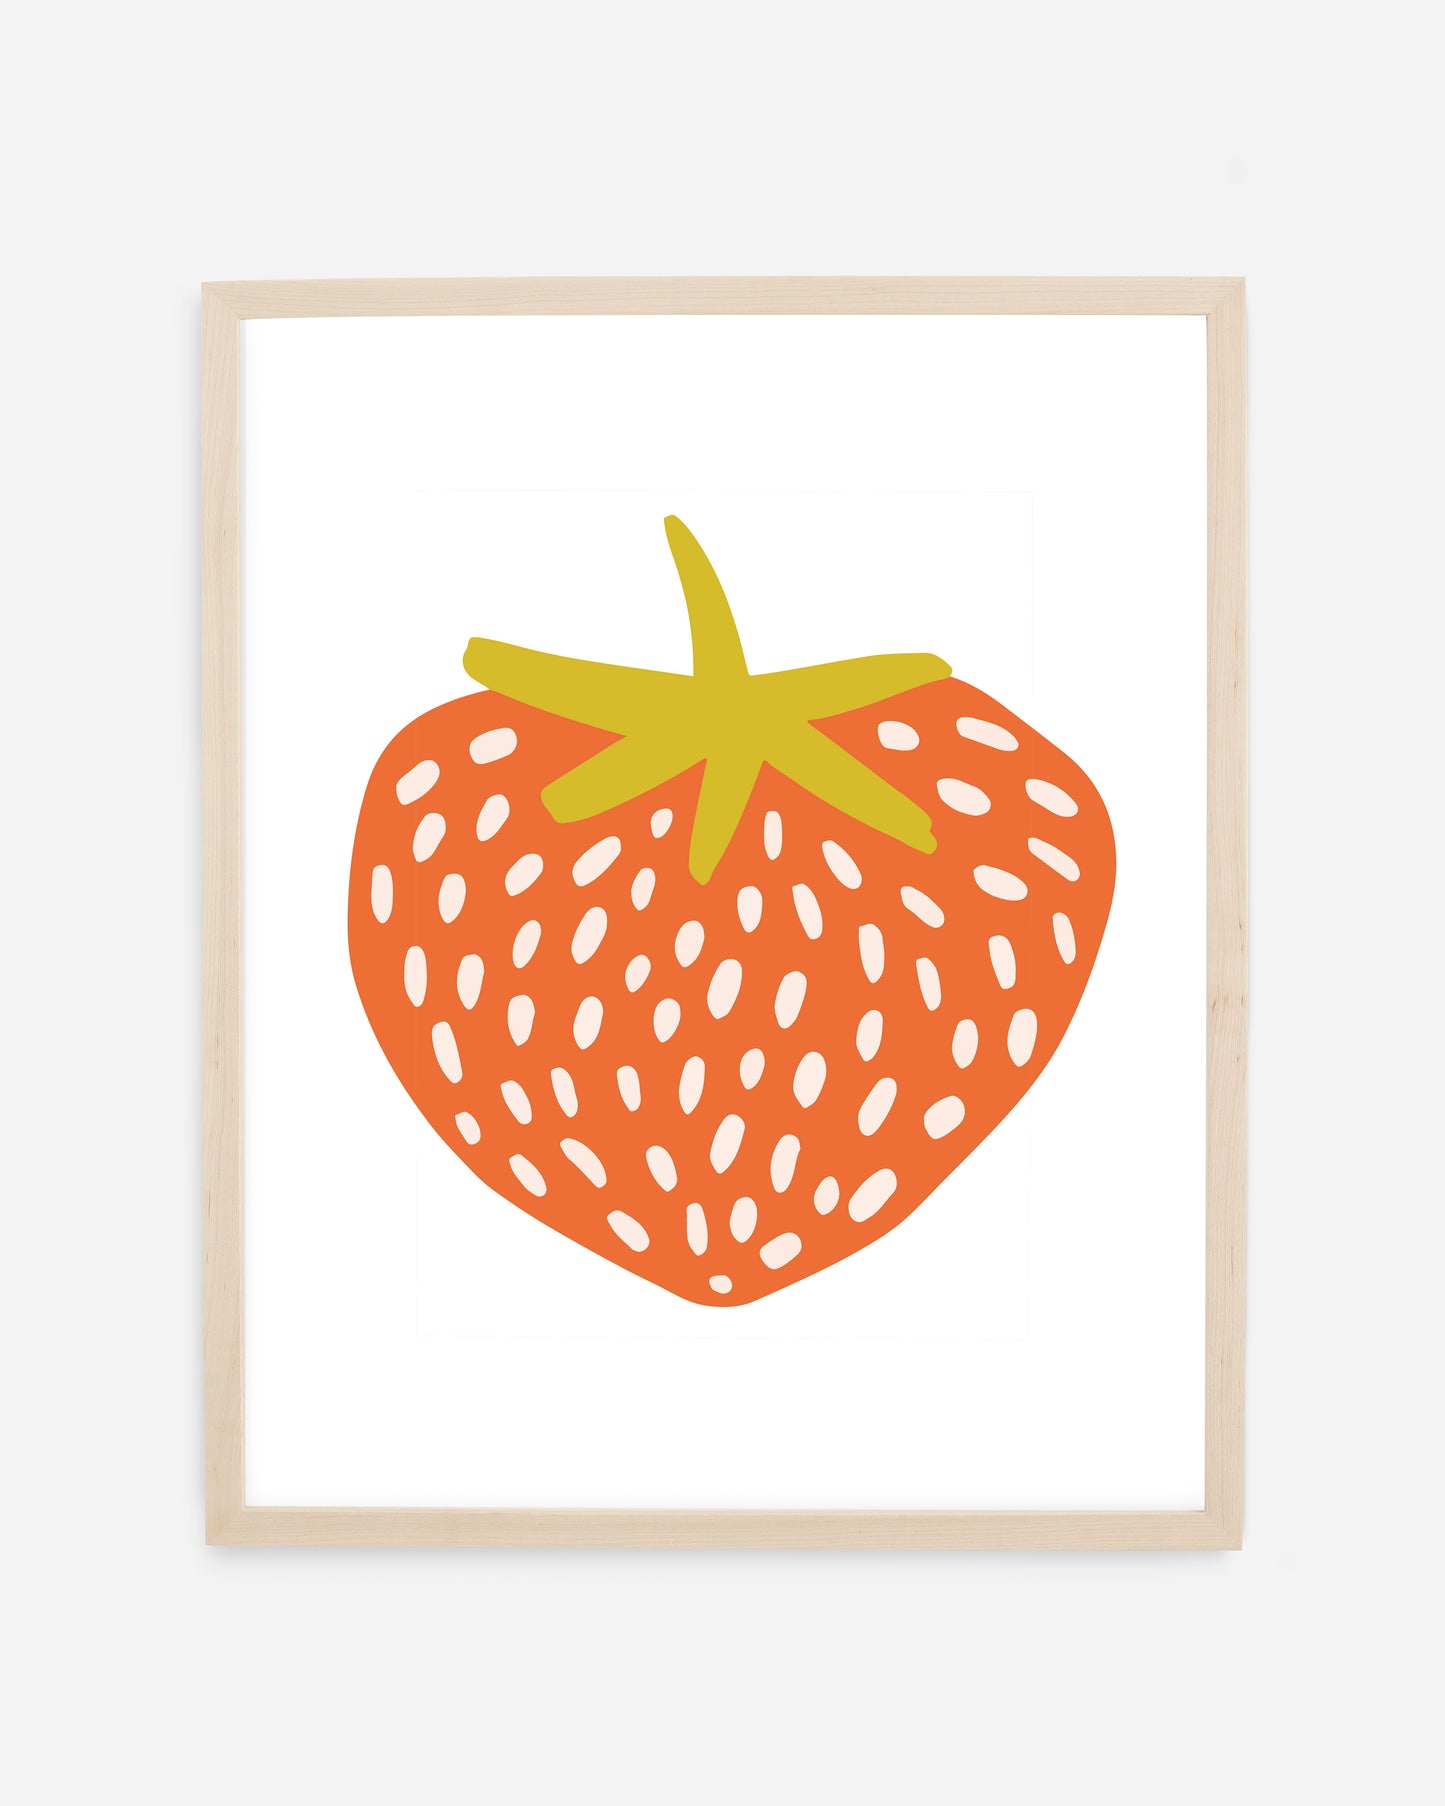 Strawberry Illustration as a fine art print, printed on warm-white, 100% cotton archival paper